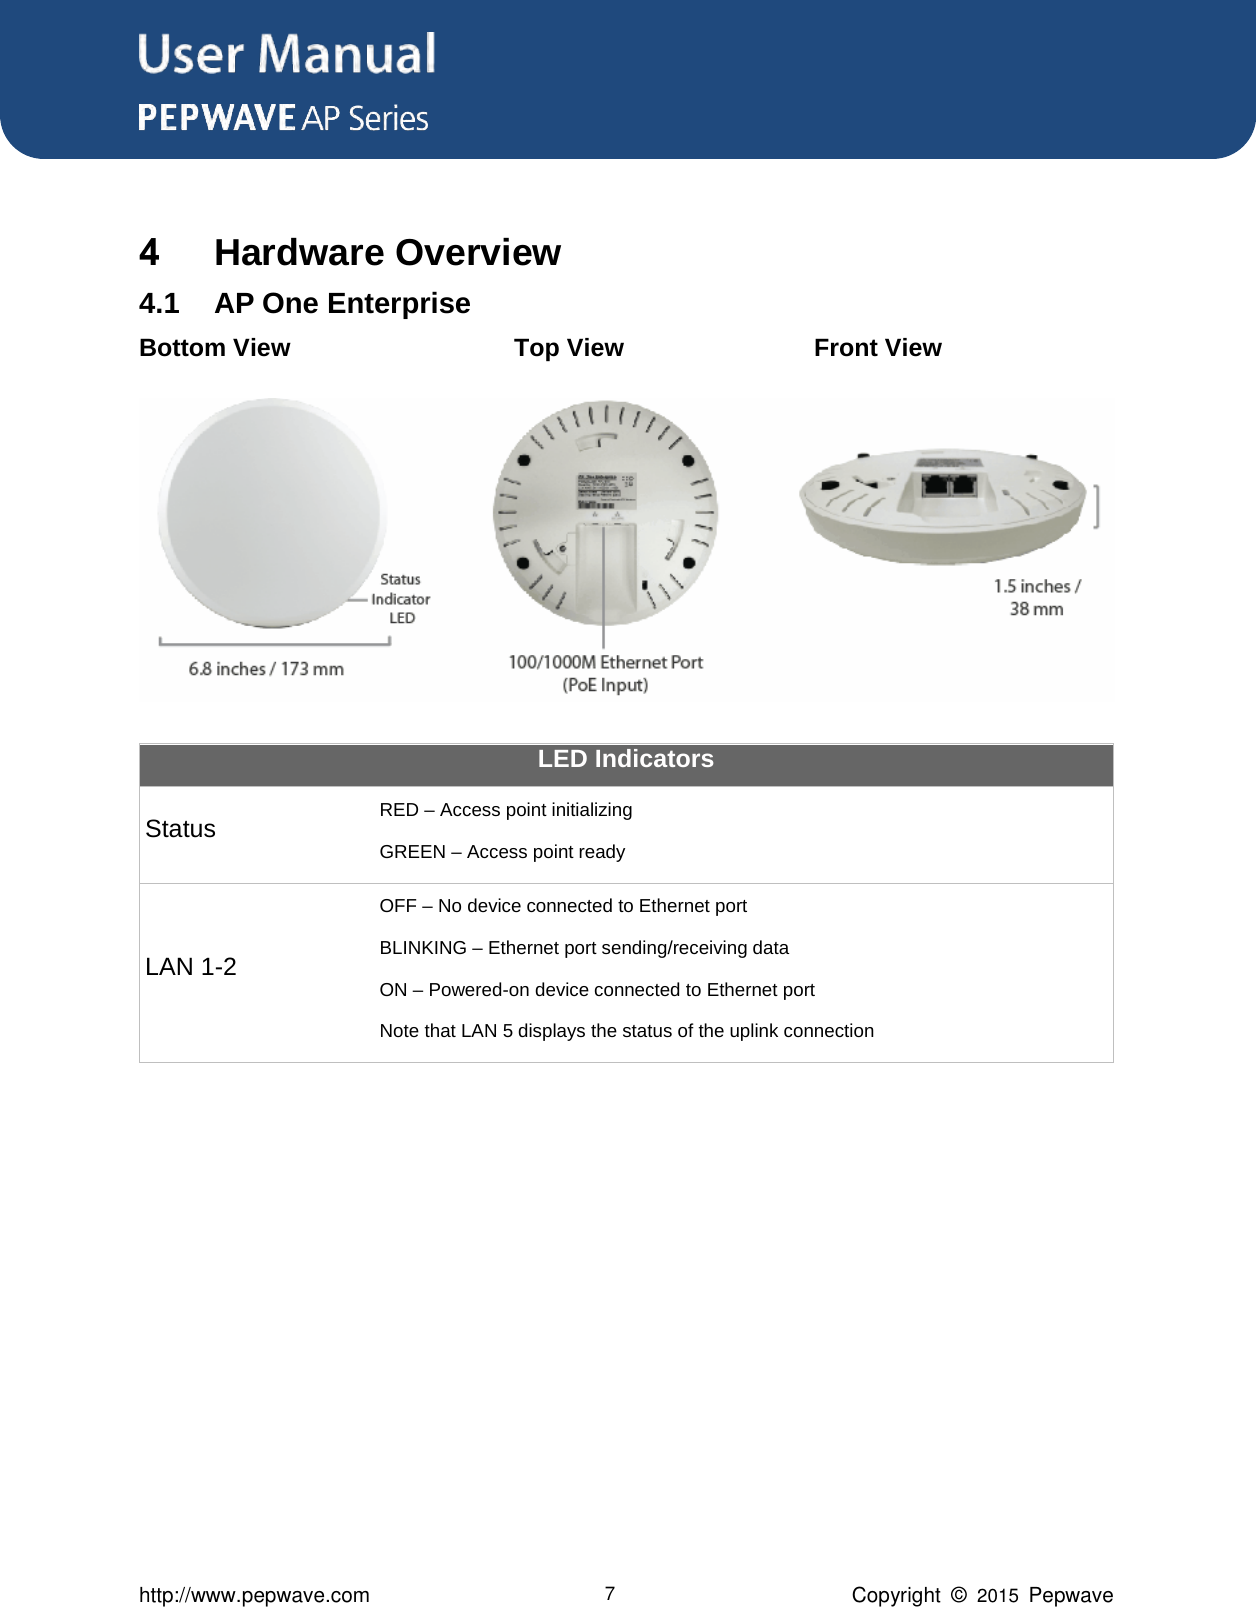 User Manual      http://www.pepwave.com 7 Copyright  ©  2015  Pepwave  4 Hardware Overview 4.1 AP One Enterprise   Bottom View      Top View      Front View  LED Indicators Status RED – Access point initializing GREEN – Access point ready LAN 1-2 OFF – No device connected to Ethernet port BLINKING – Ethernet port sending/receiving data ON – Powered-on device connected to Ethernet port Note that LAN 5 displays the status of the uplink connection  